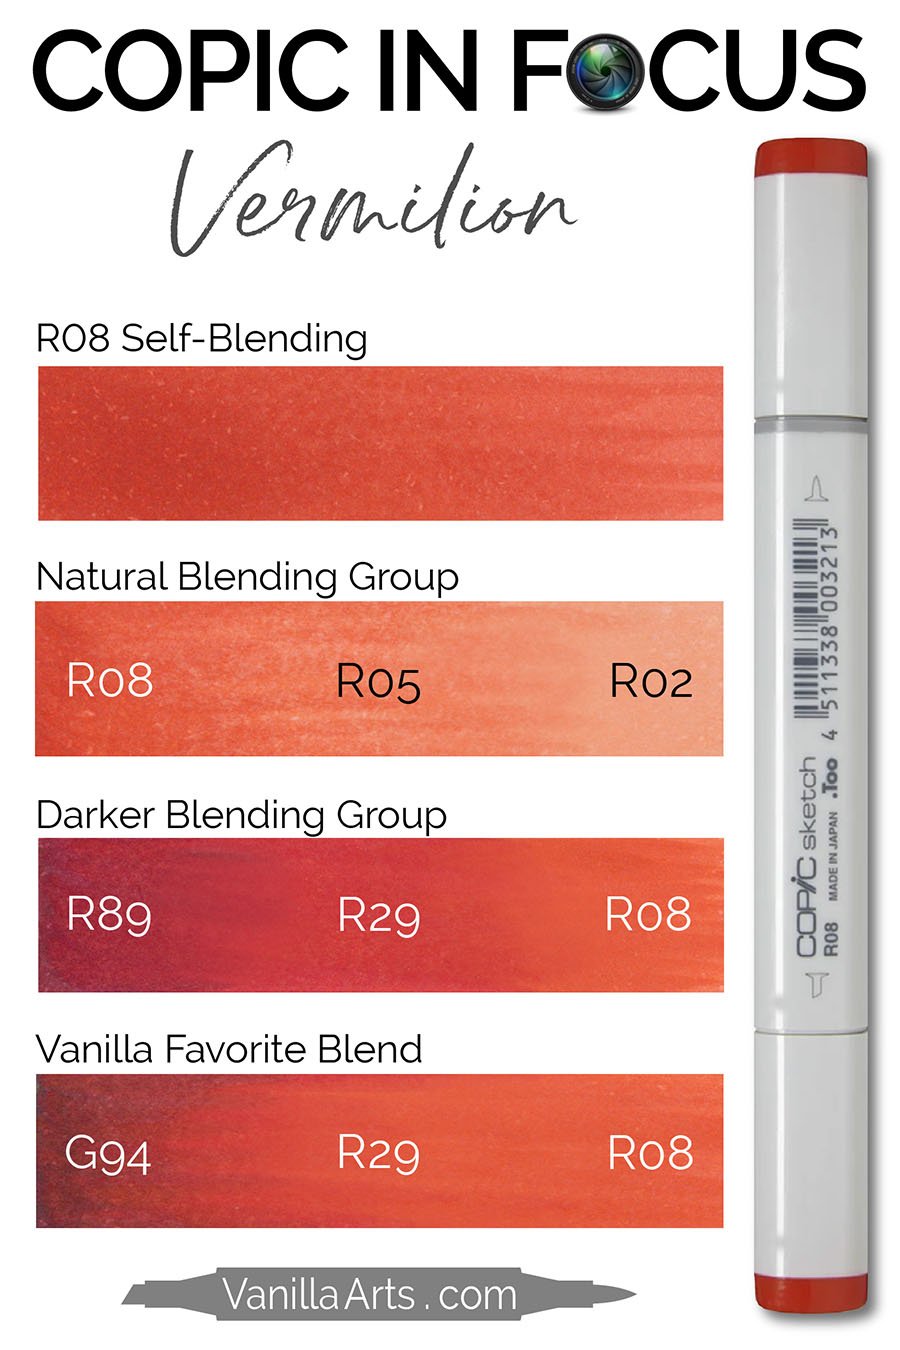 Copic Various Ink 12Ml Refill R08 Vermillion